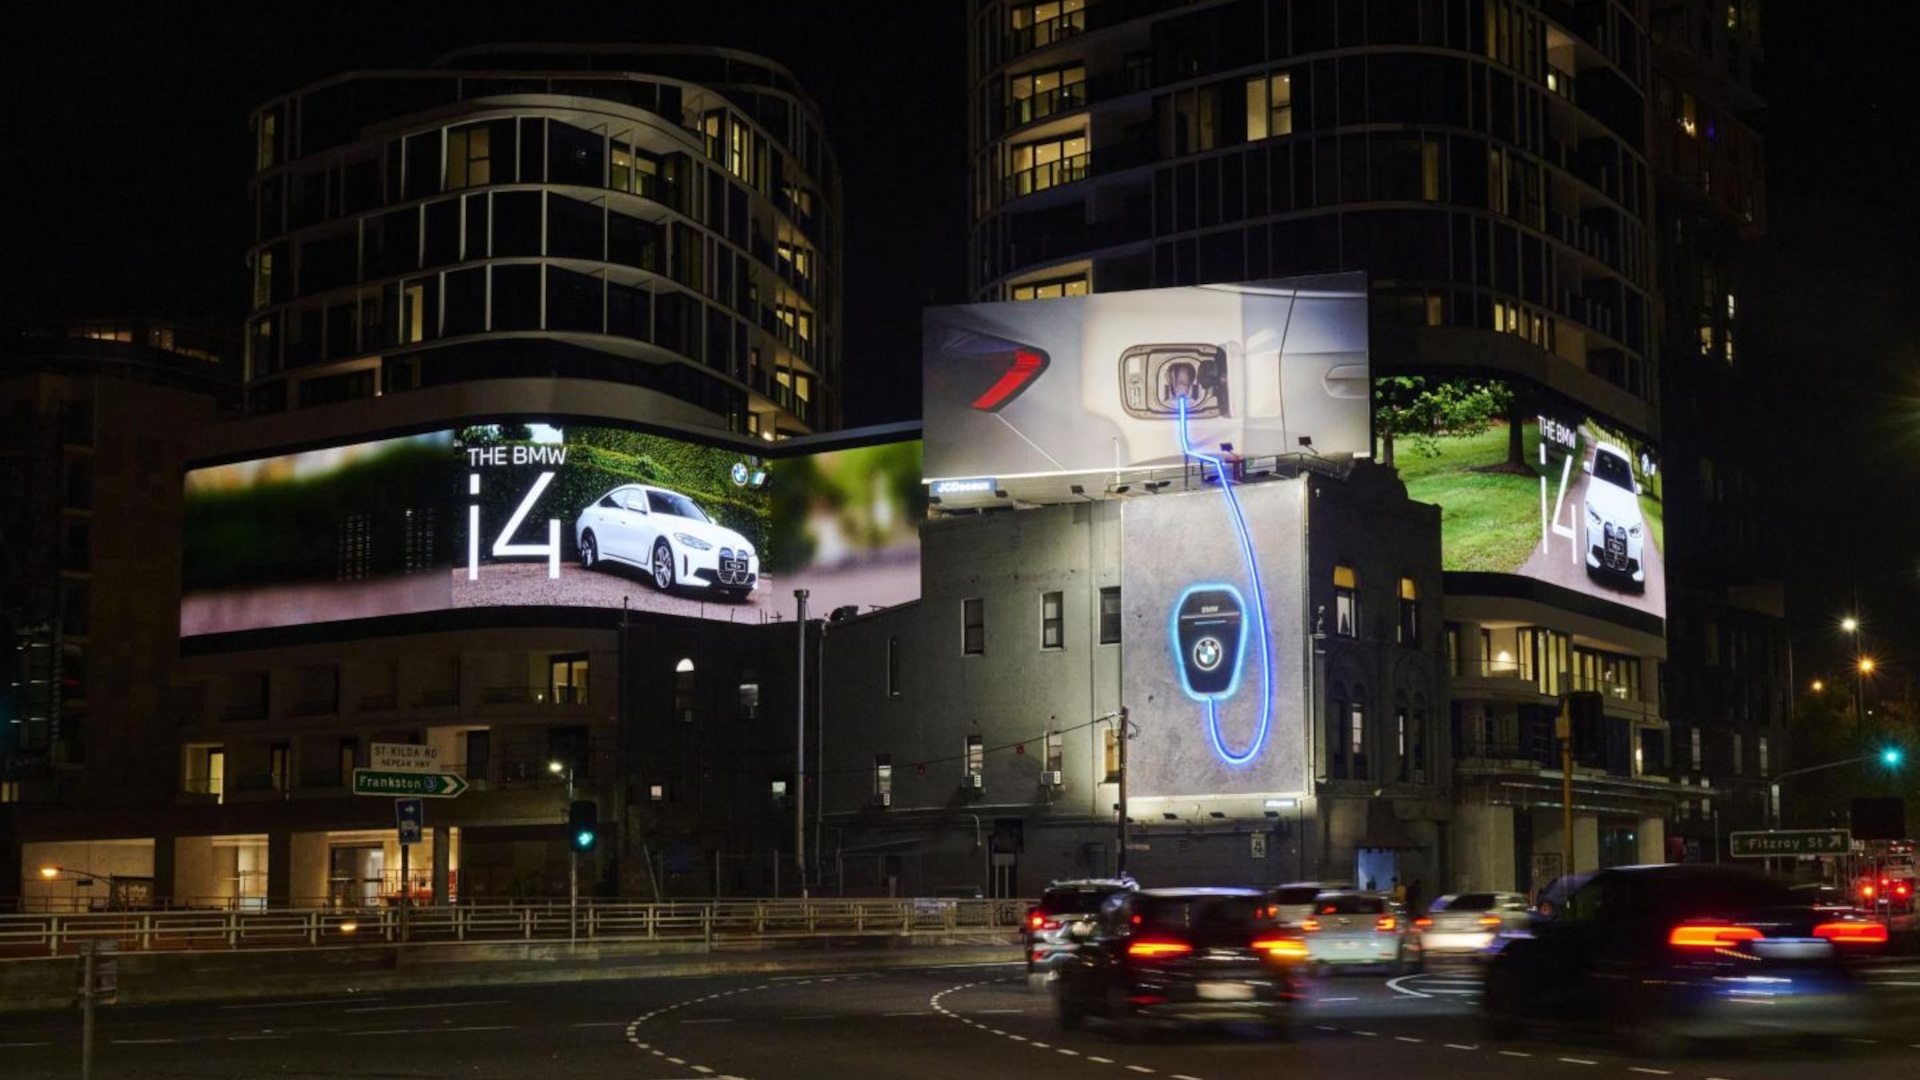 JCDecaux's new iconic Screen in Melbourne (Image: JCDecaux)